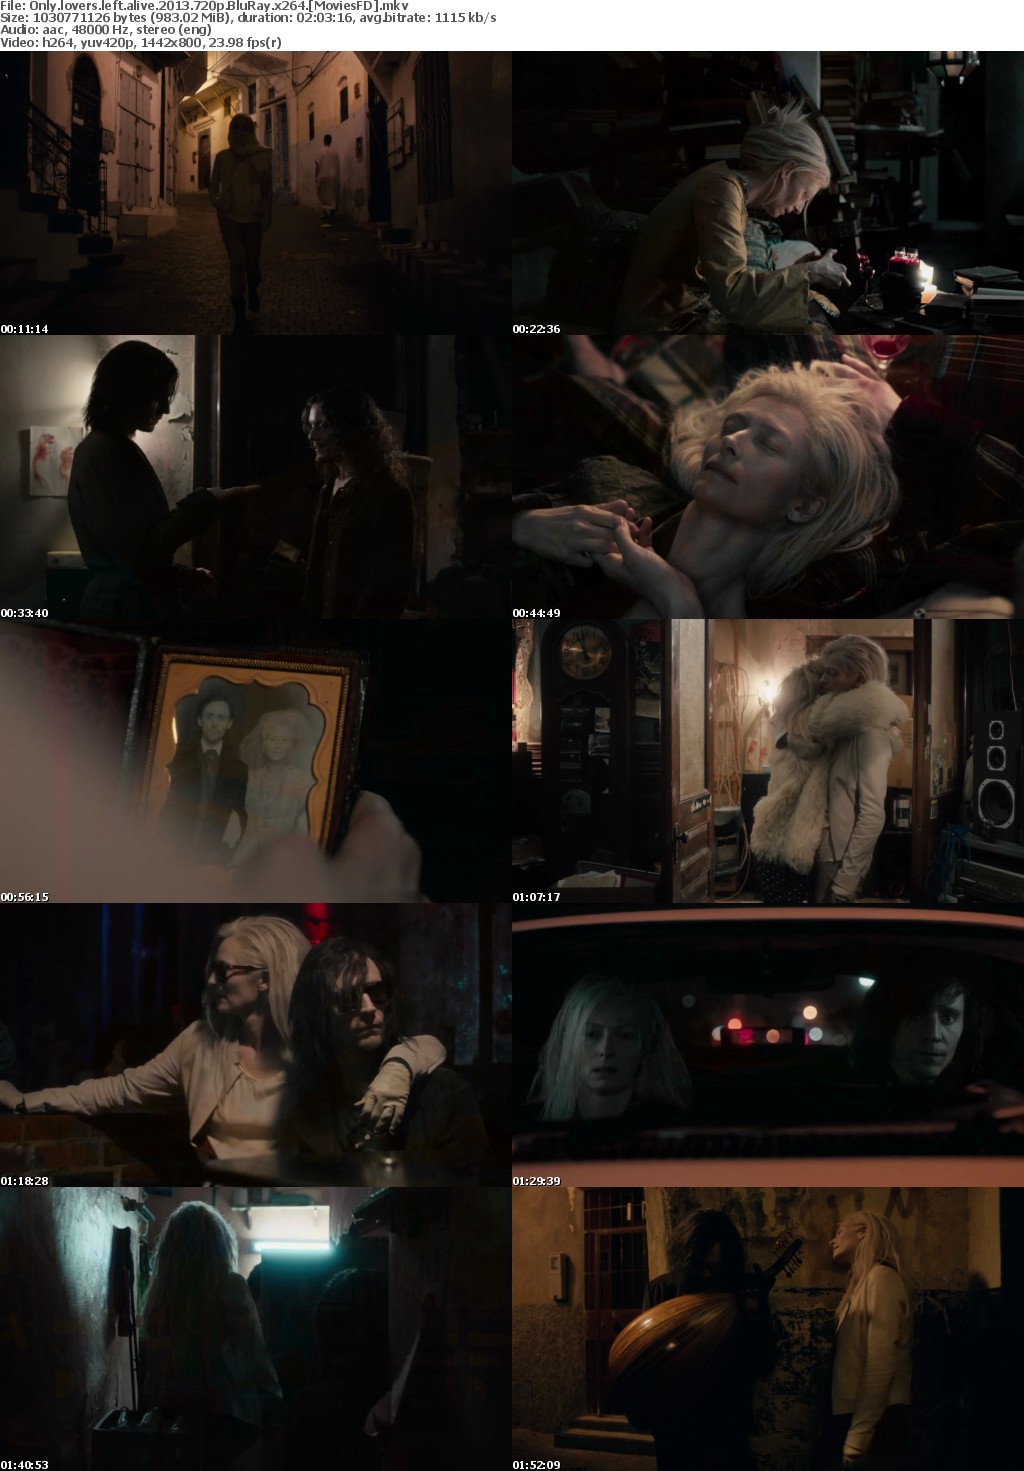 Only Lovers Left Alive (2013) 720p BluRay x264 - MoviesFD